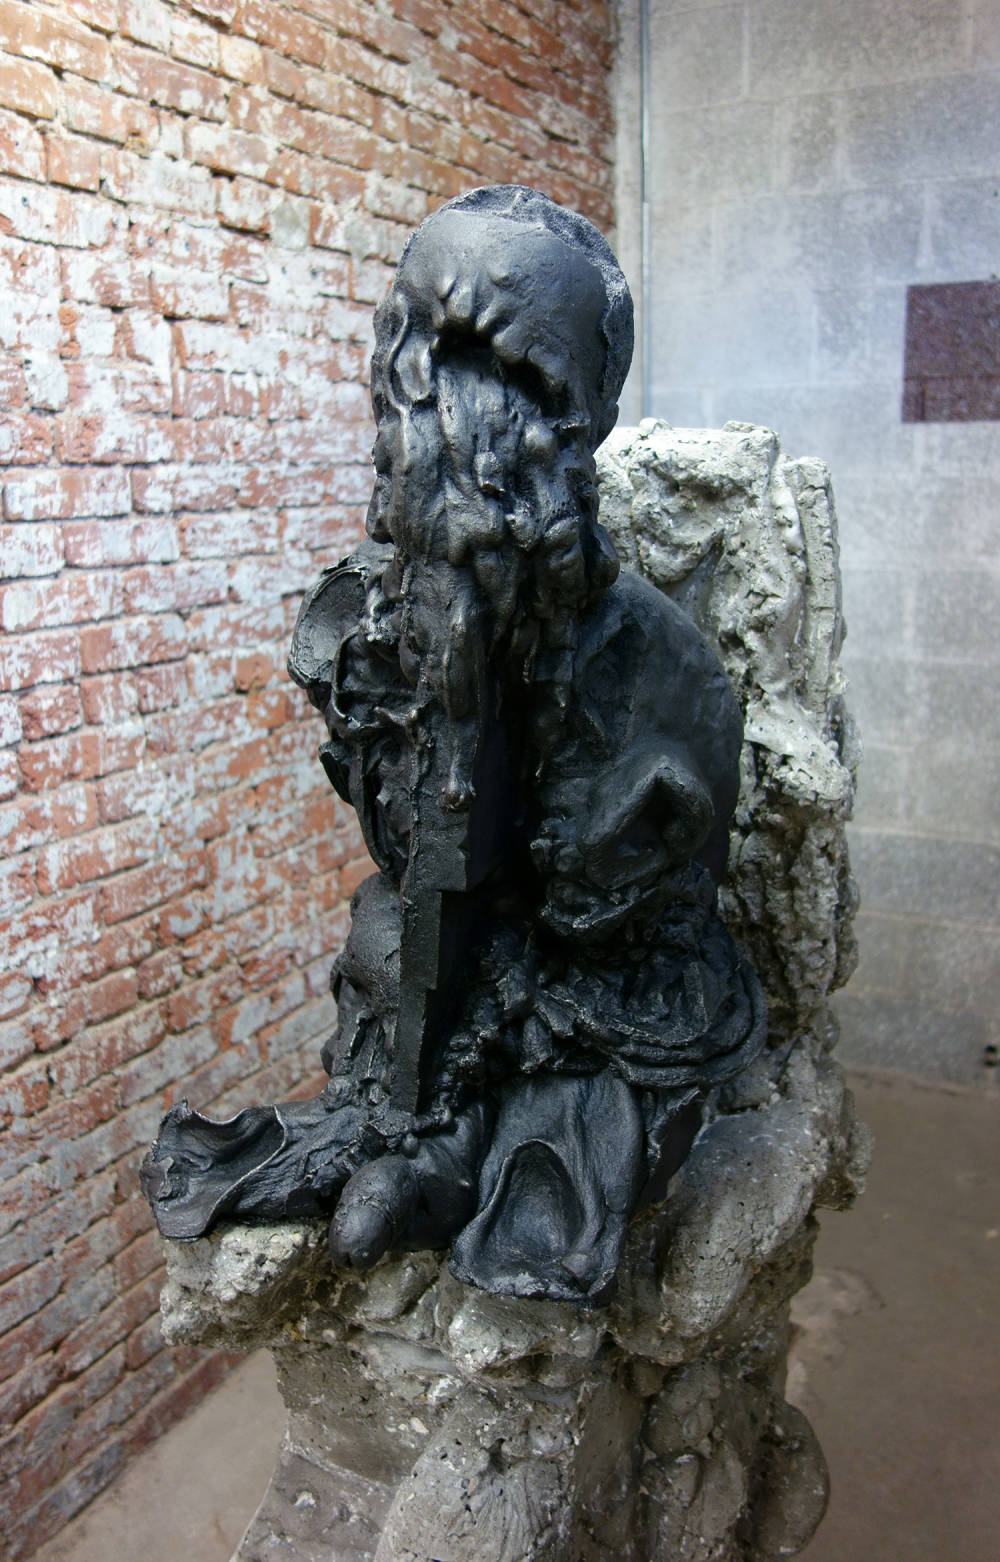 Installation view of metal and concrete sculpture, depicting a cast iron sculpture of a head and torso melting and/or decaying.